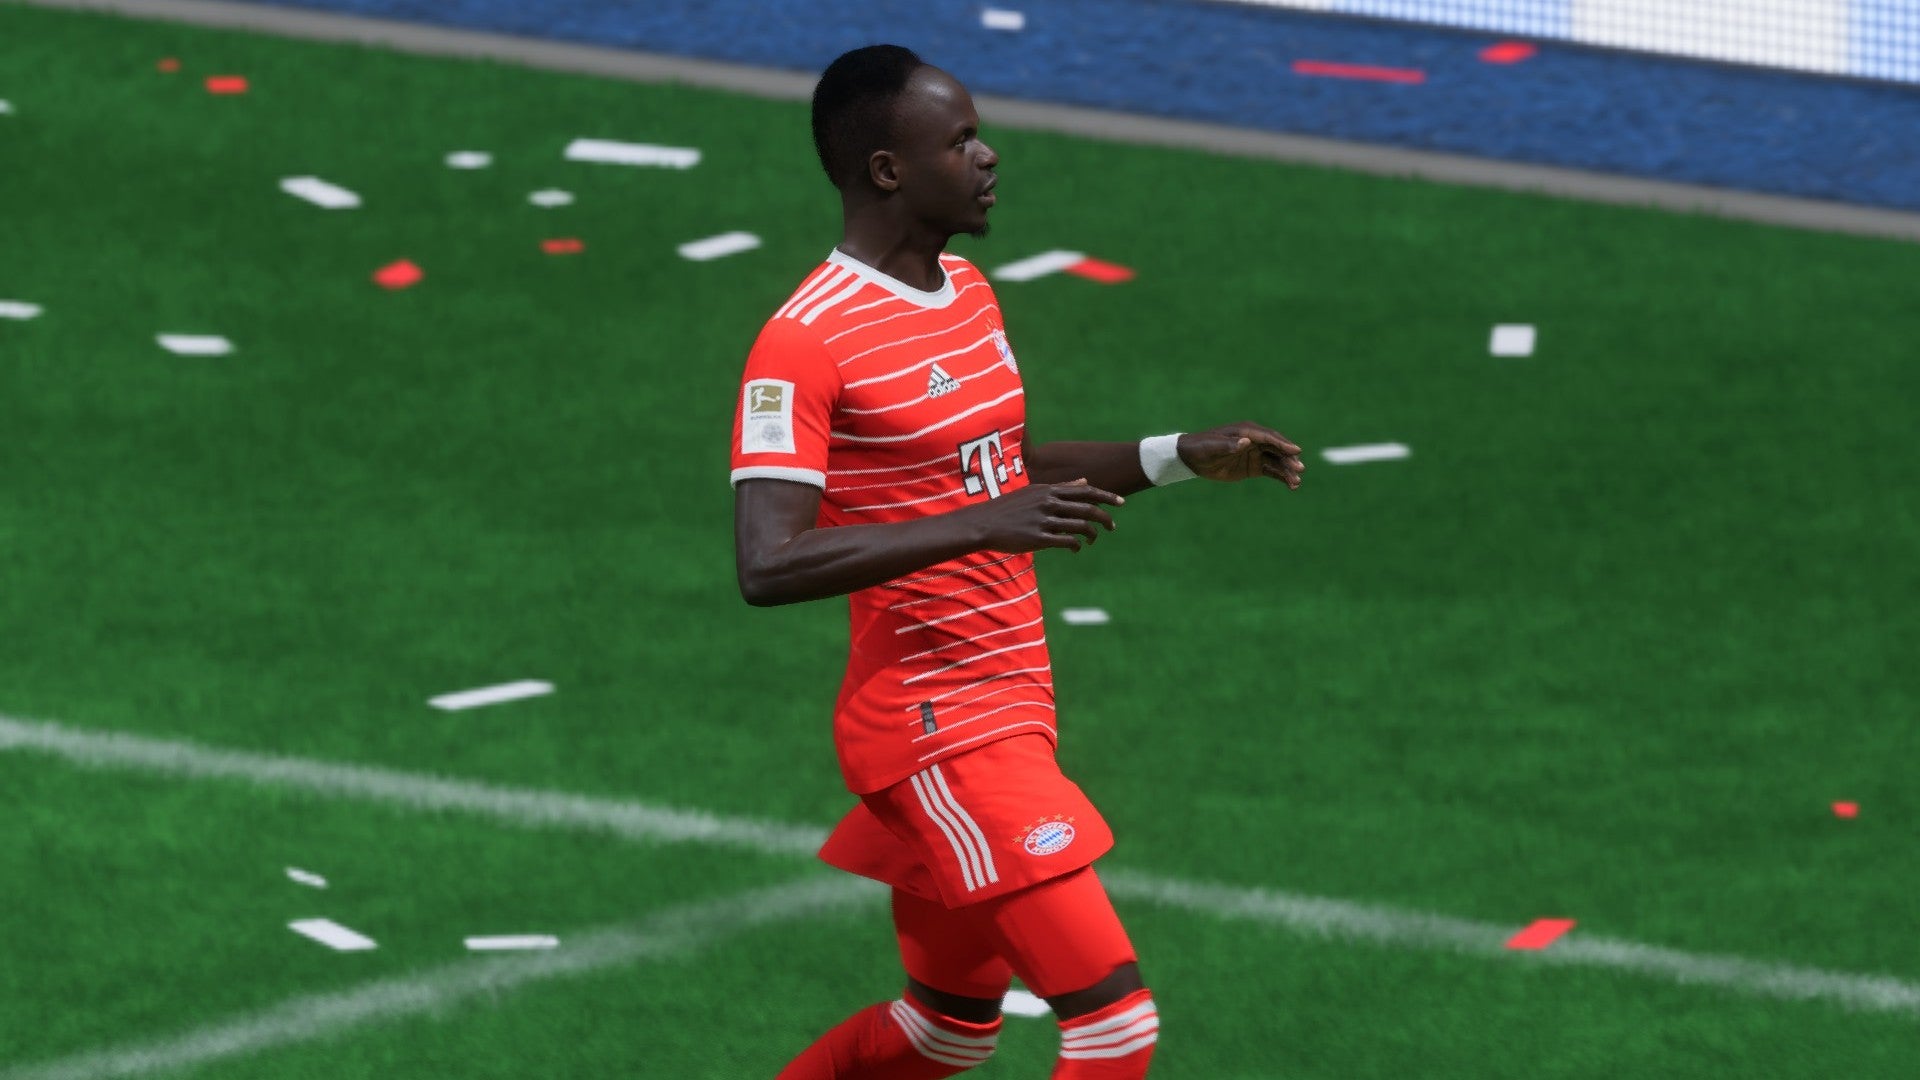 FIFA 23 screenshot showing Mane staring to the right after scoring a goal.